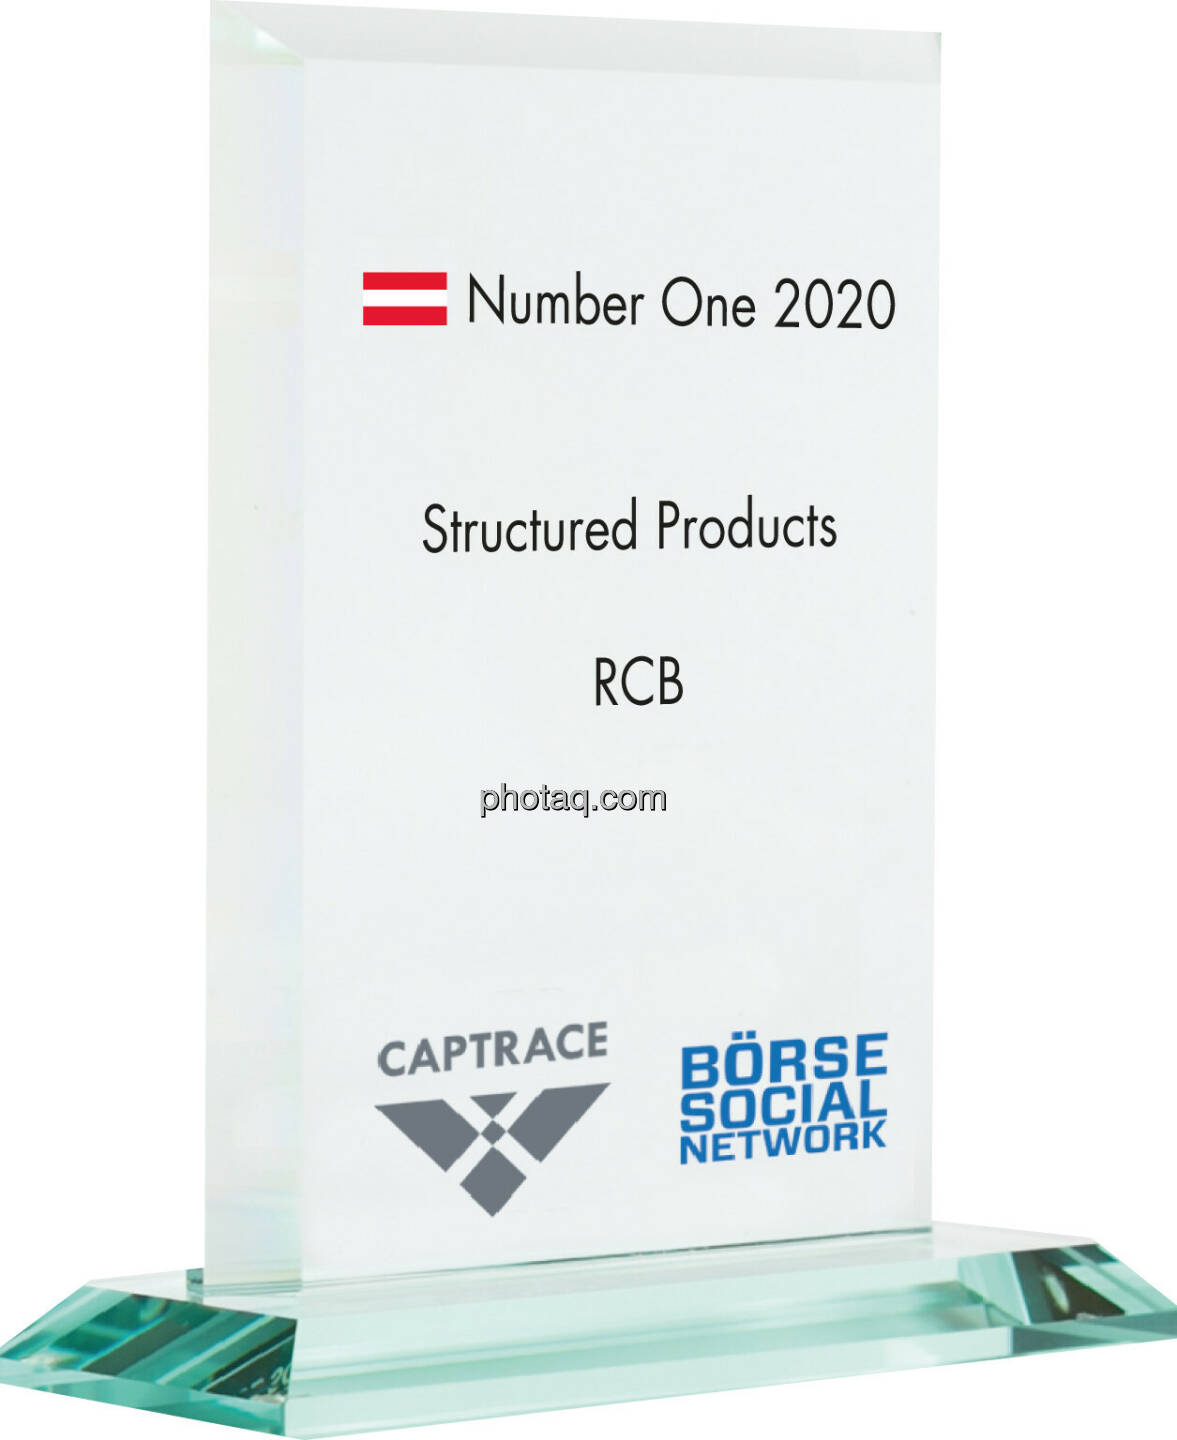 Number One Awards 2020 - Structured Products RCB